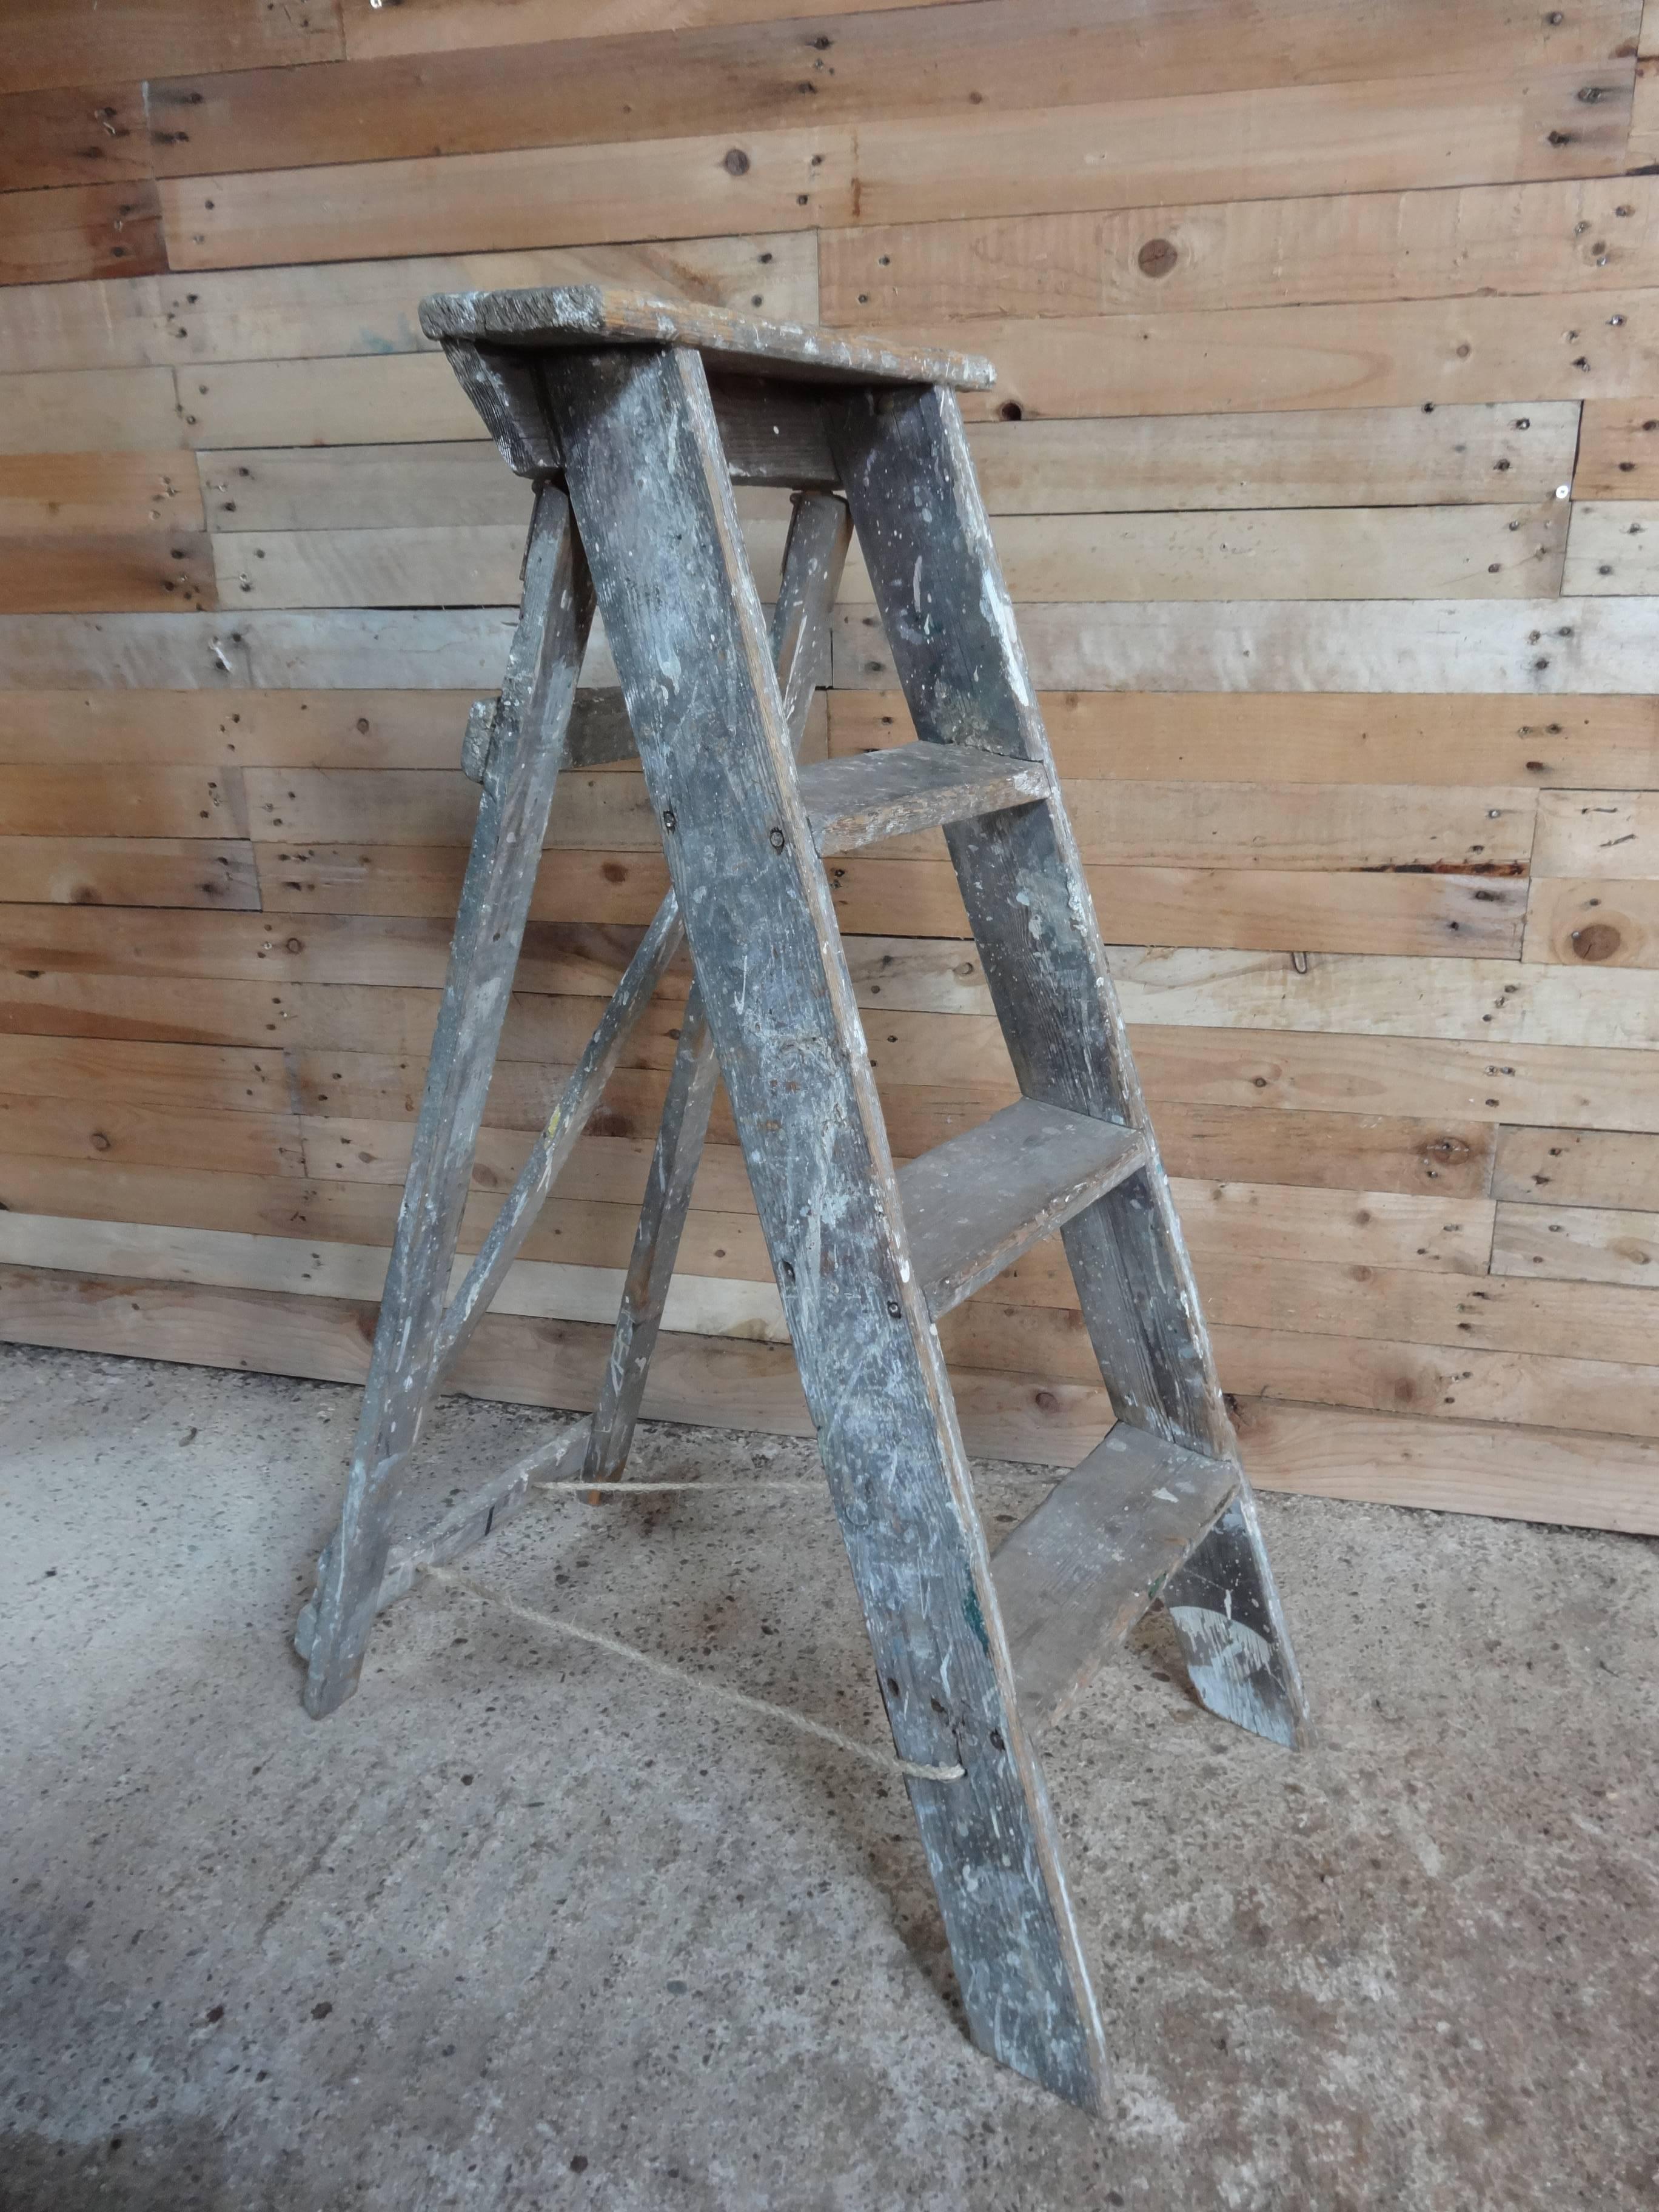 1900s French vintage fruit picking / painting ladder.
1900s French vintage artists painting ladder library steps / shop display.

This ladder will be great as an vintage library steps
It is sturdy and usable.

Measures: Height 103cm, depth